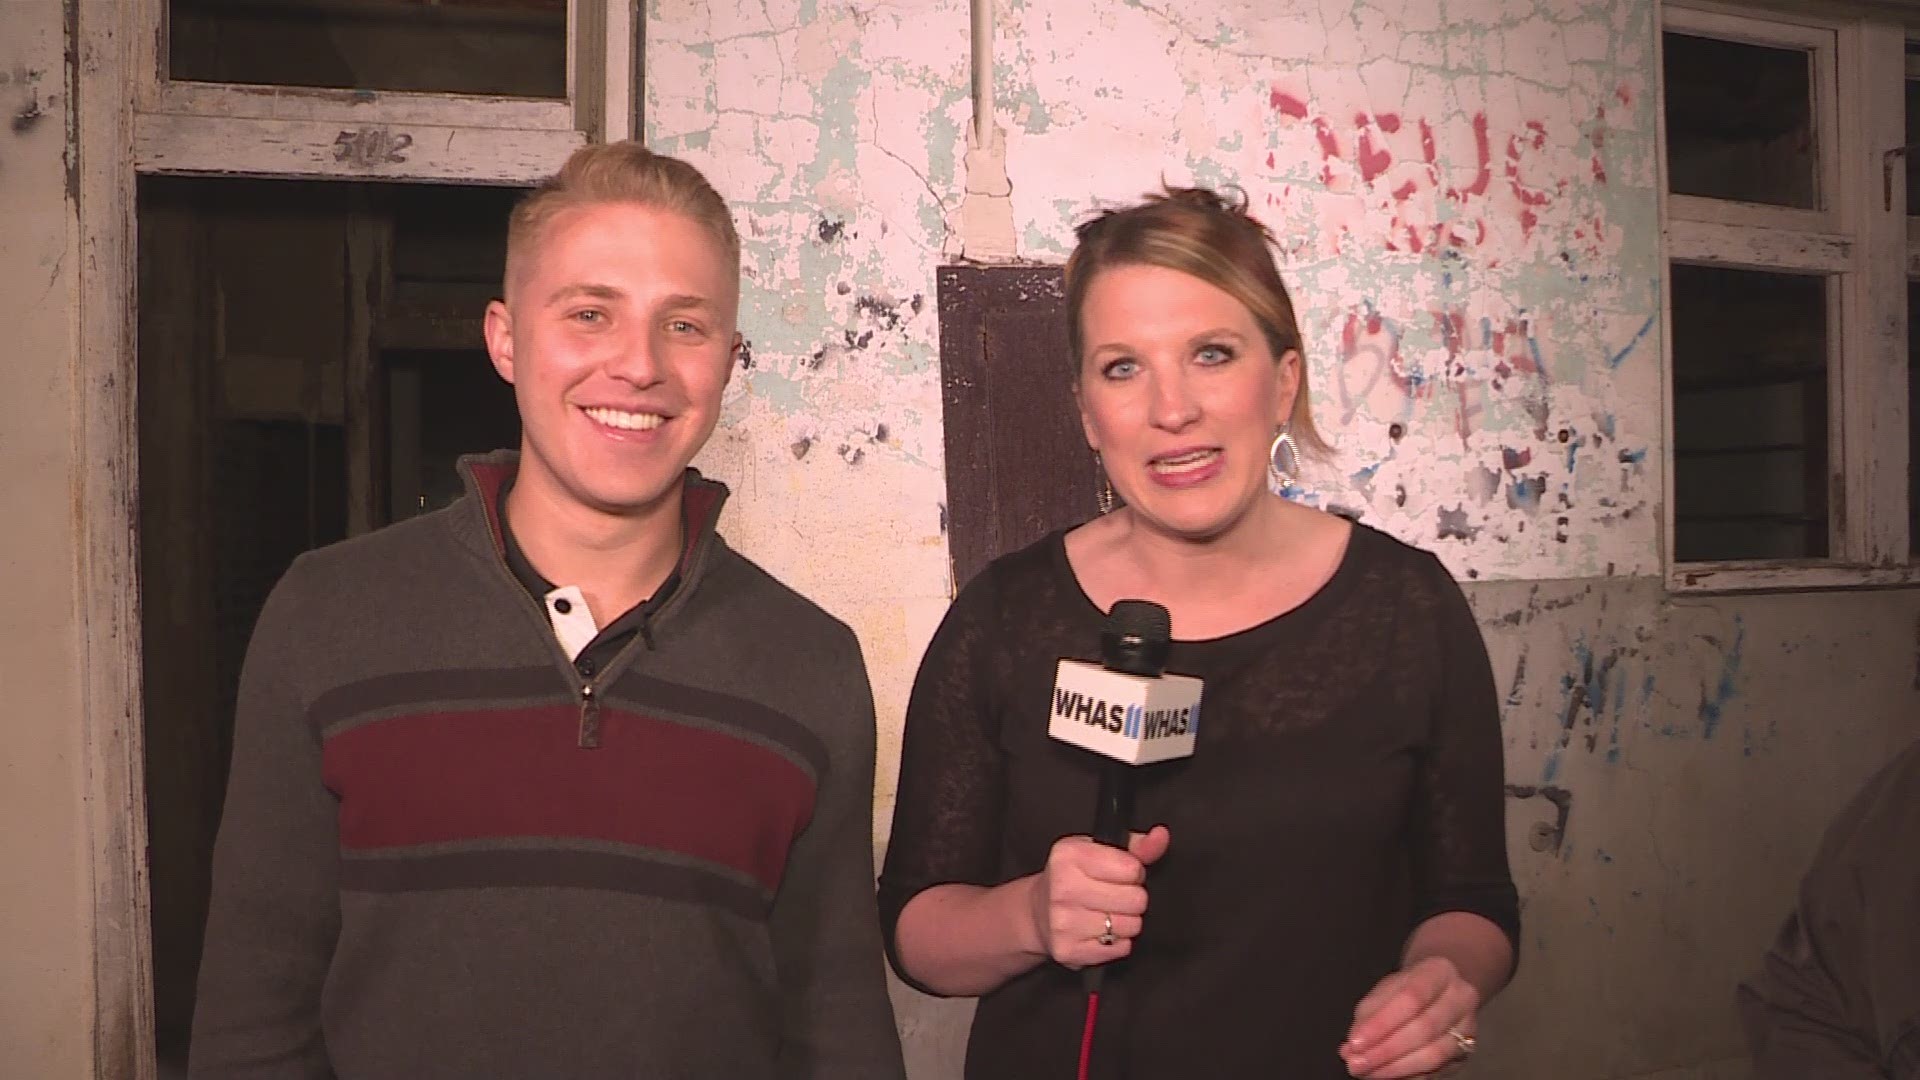 Inside Waverly Hills with WHAS11's Brooke Hasch and Rob Harris